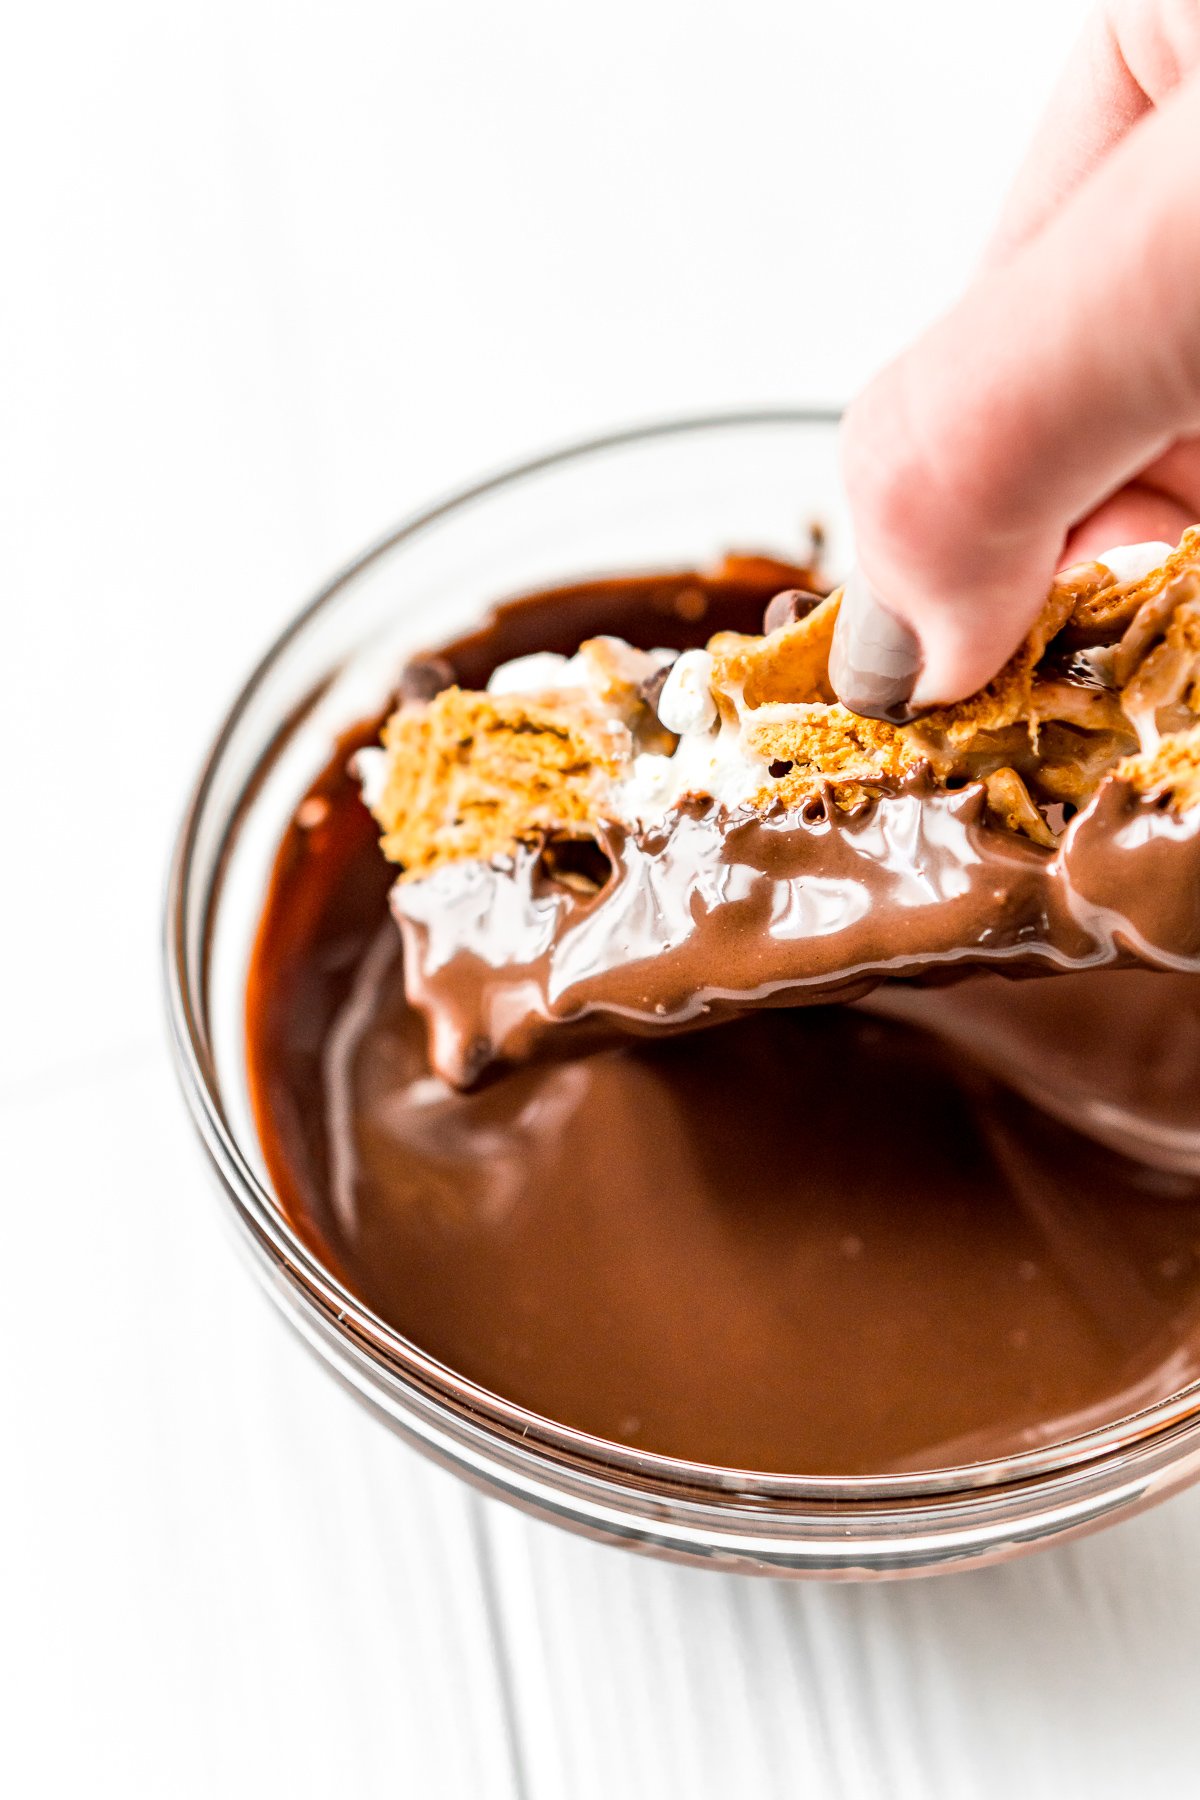 Woman's hand dipping a golden grahams bar in melted chocolate.